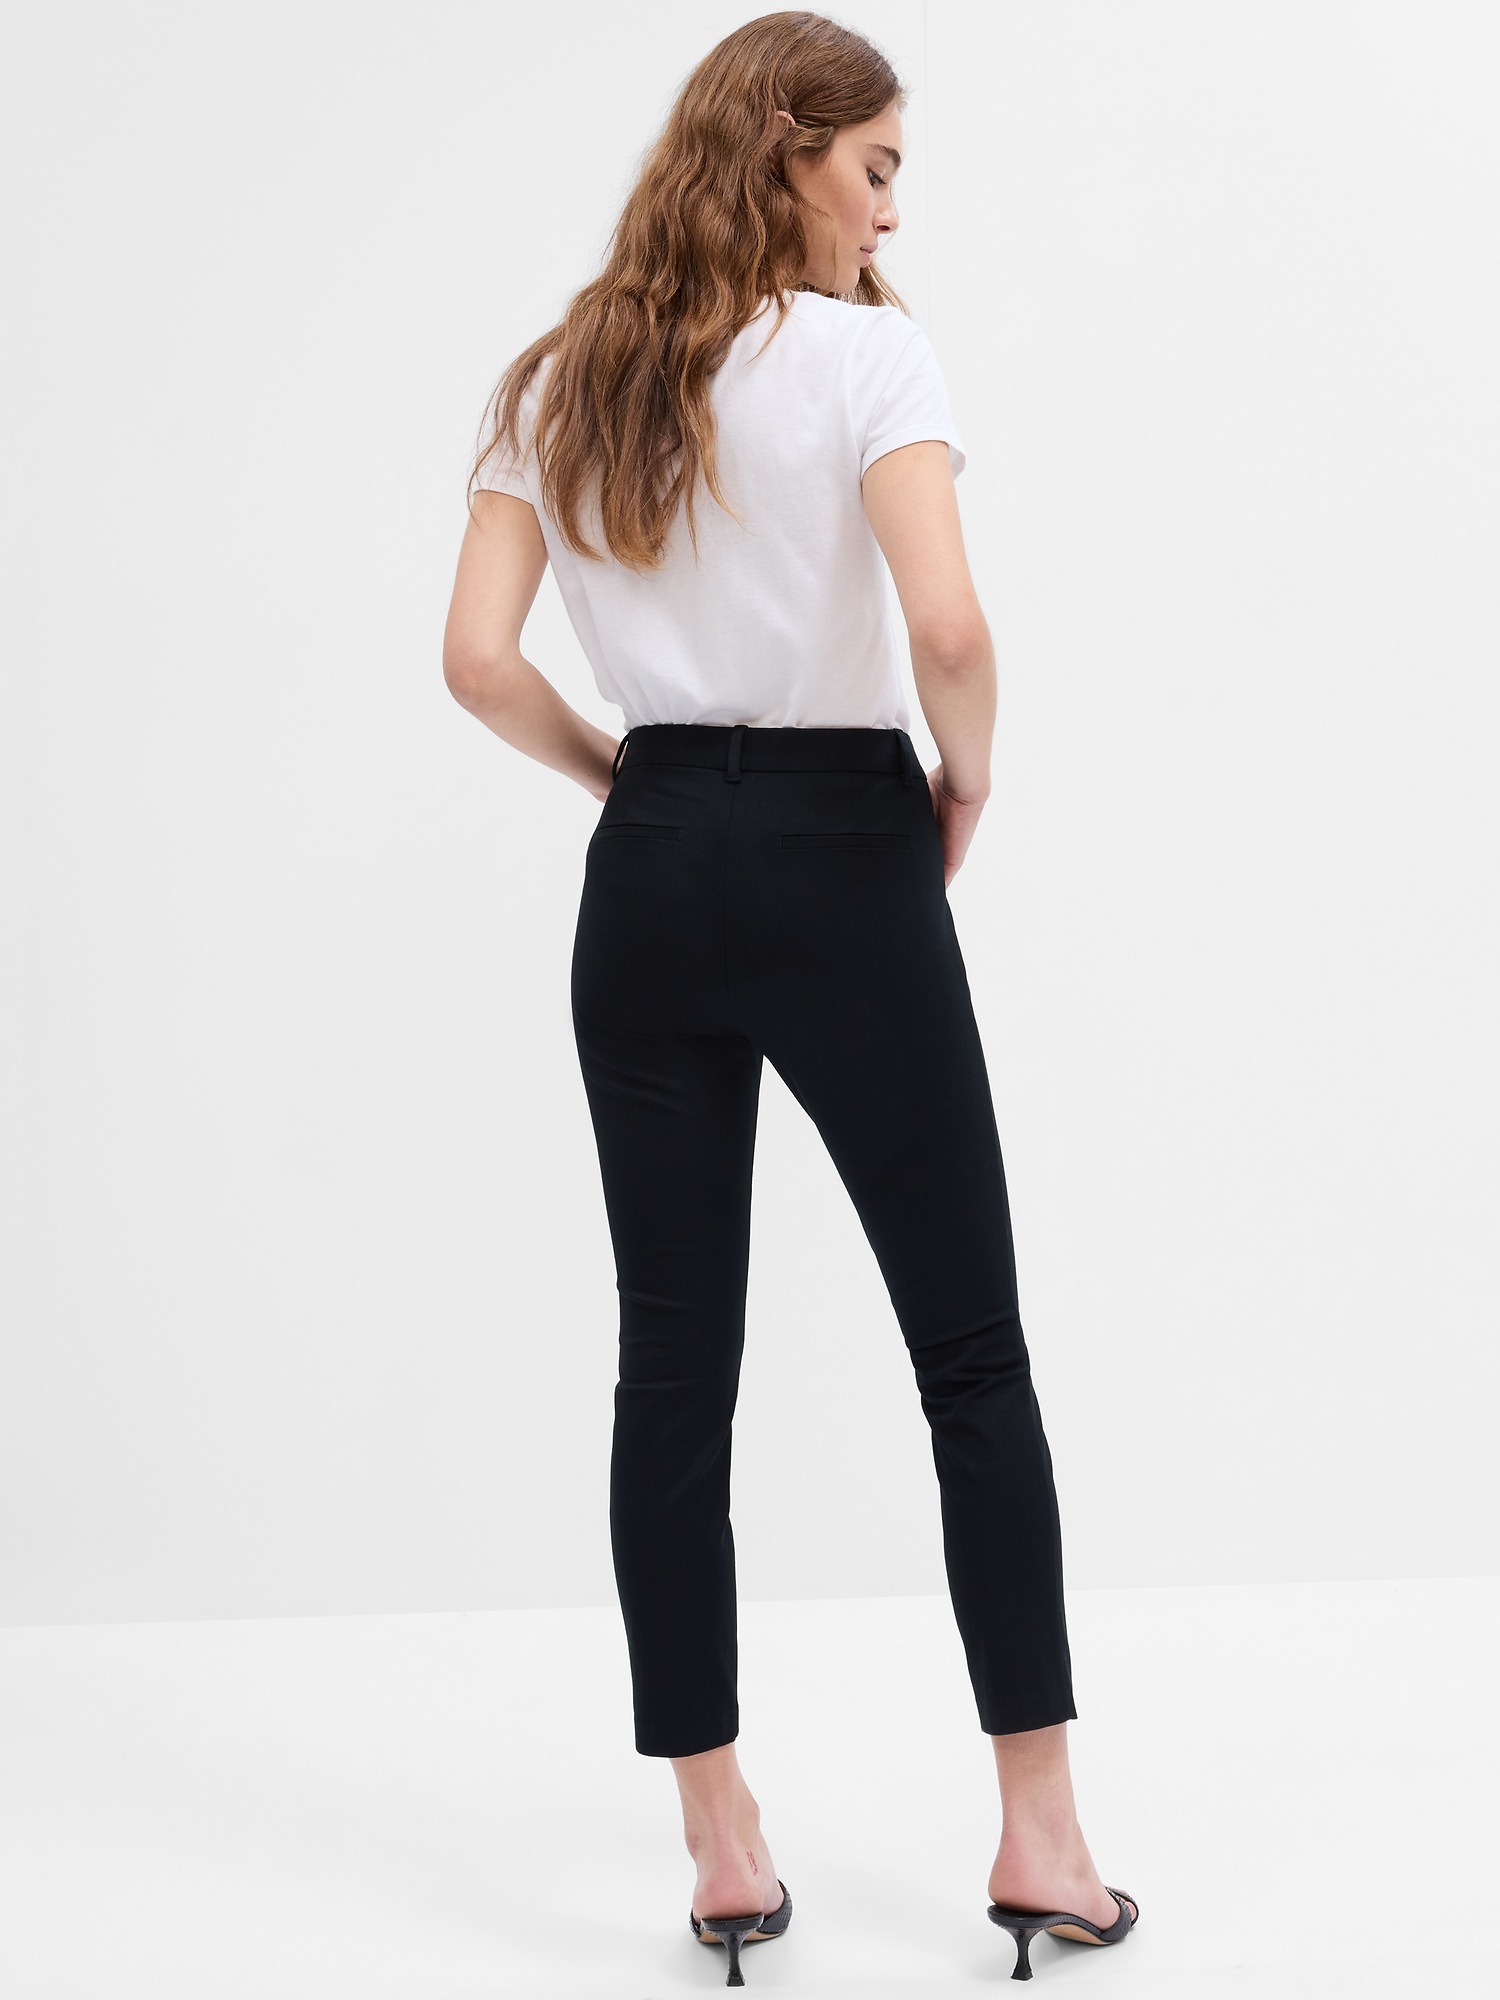 Women's Flexcellent Skinny Leg Ankle Pants | Duluth Trading Company